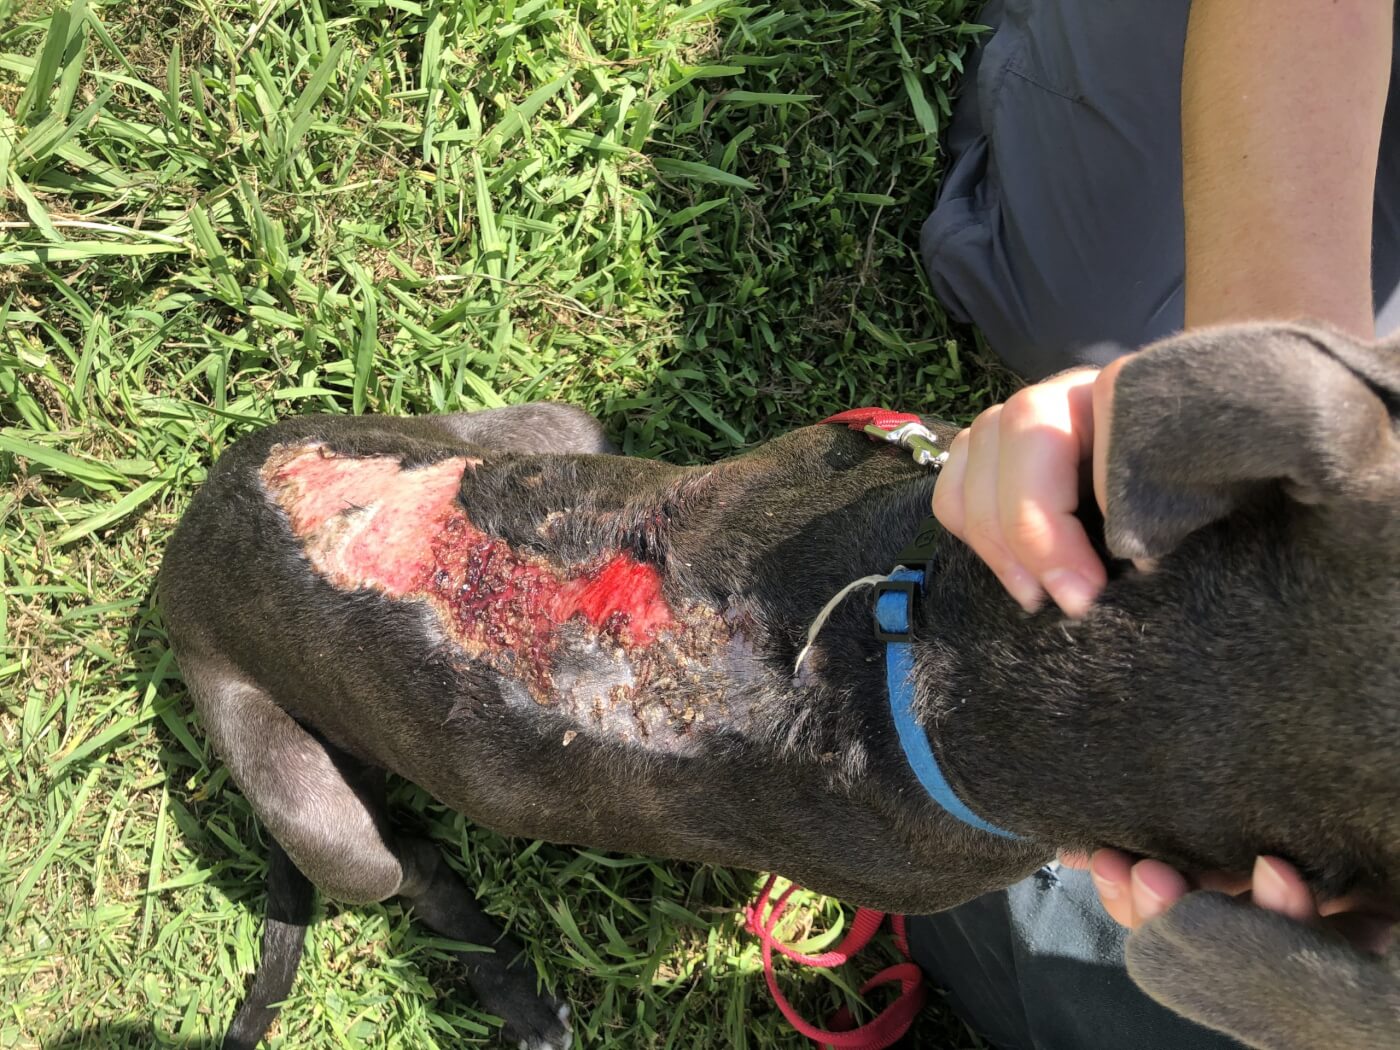 Dog with a chemical burn from living in neglectful conditions